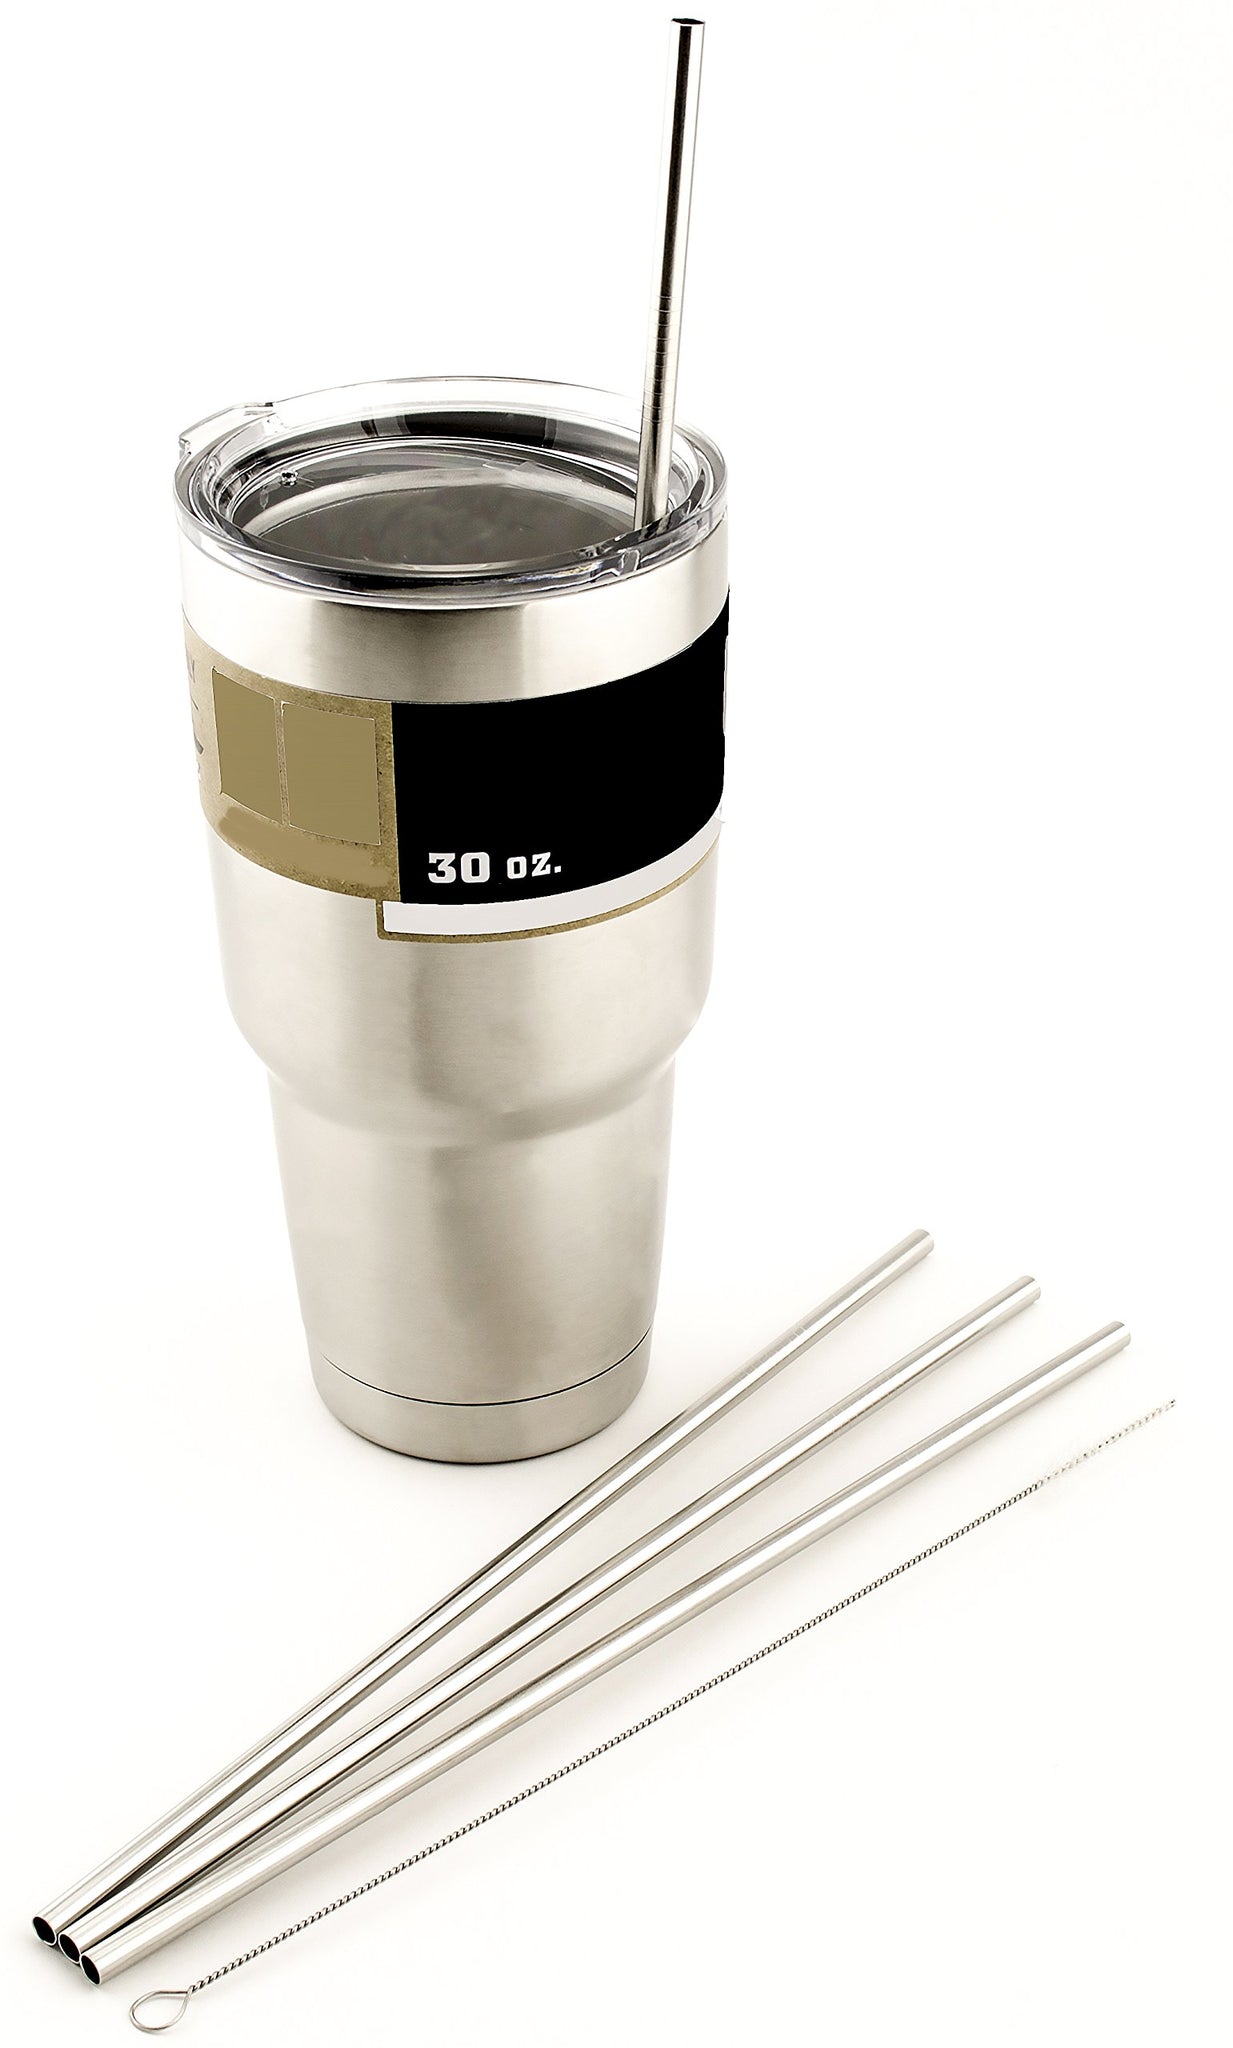 4 LONG Stainless Steel Straws fits 30 oz Yeti Tumbler Rambler Cups - CocoStraw Brand Drinking Straw